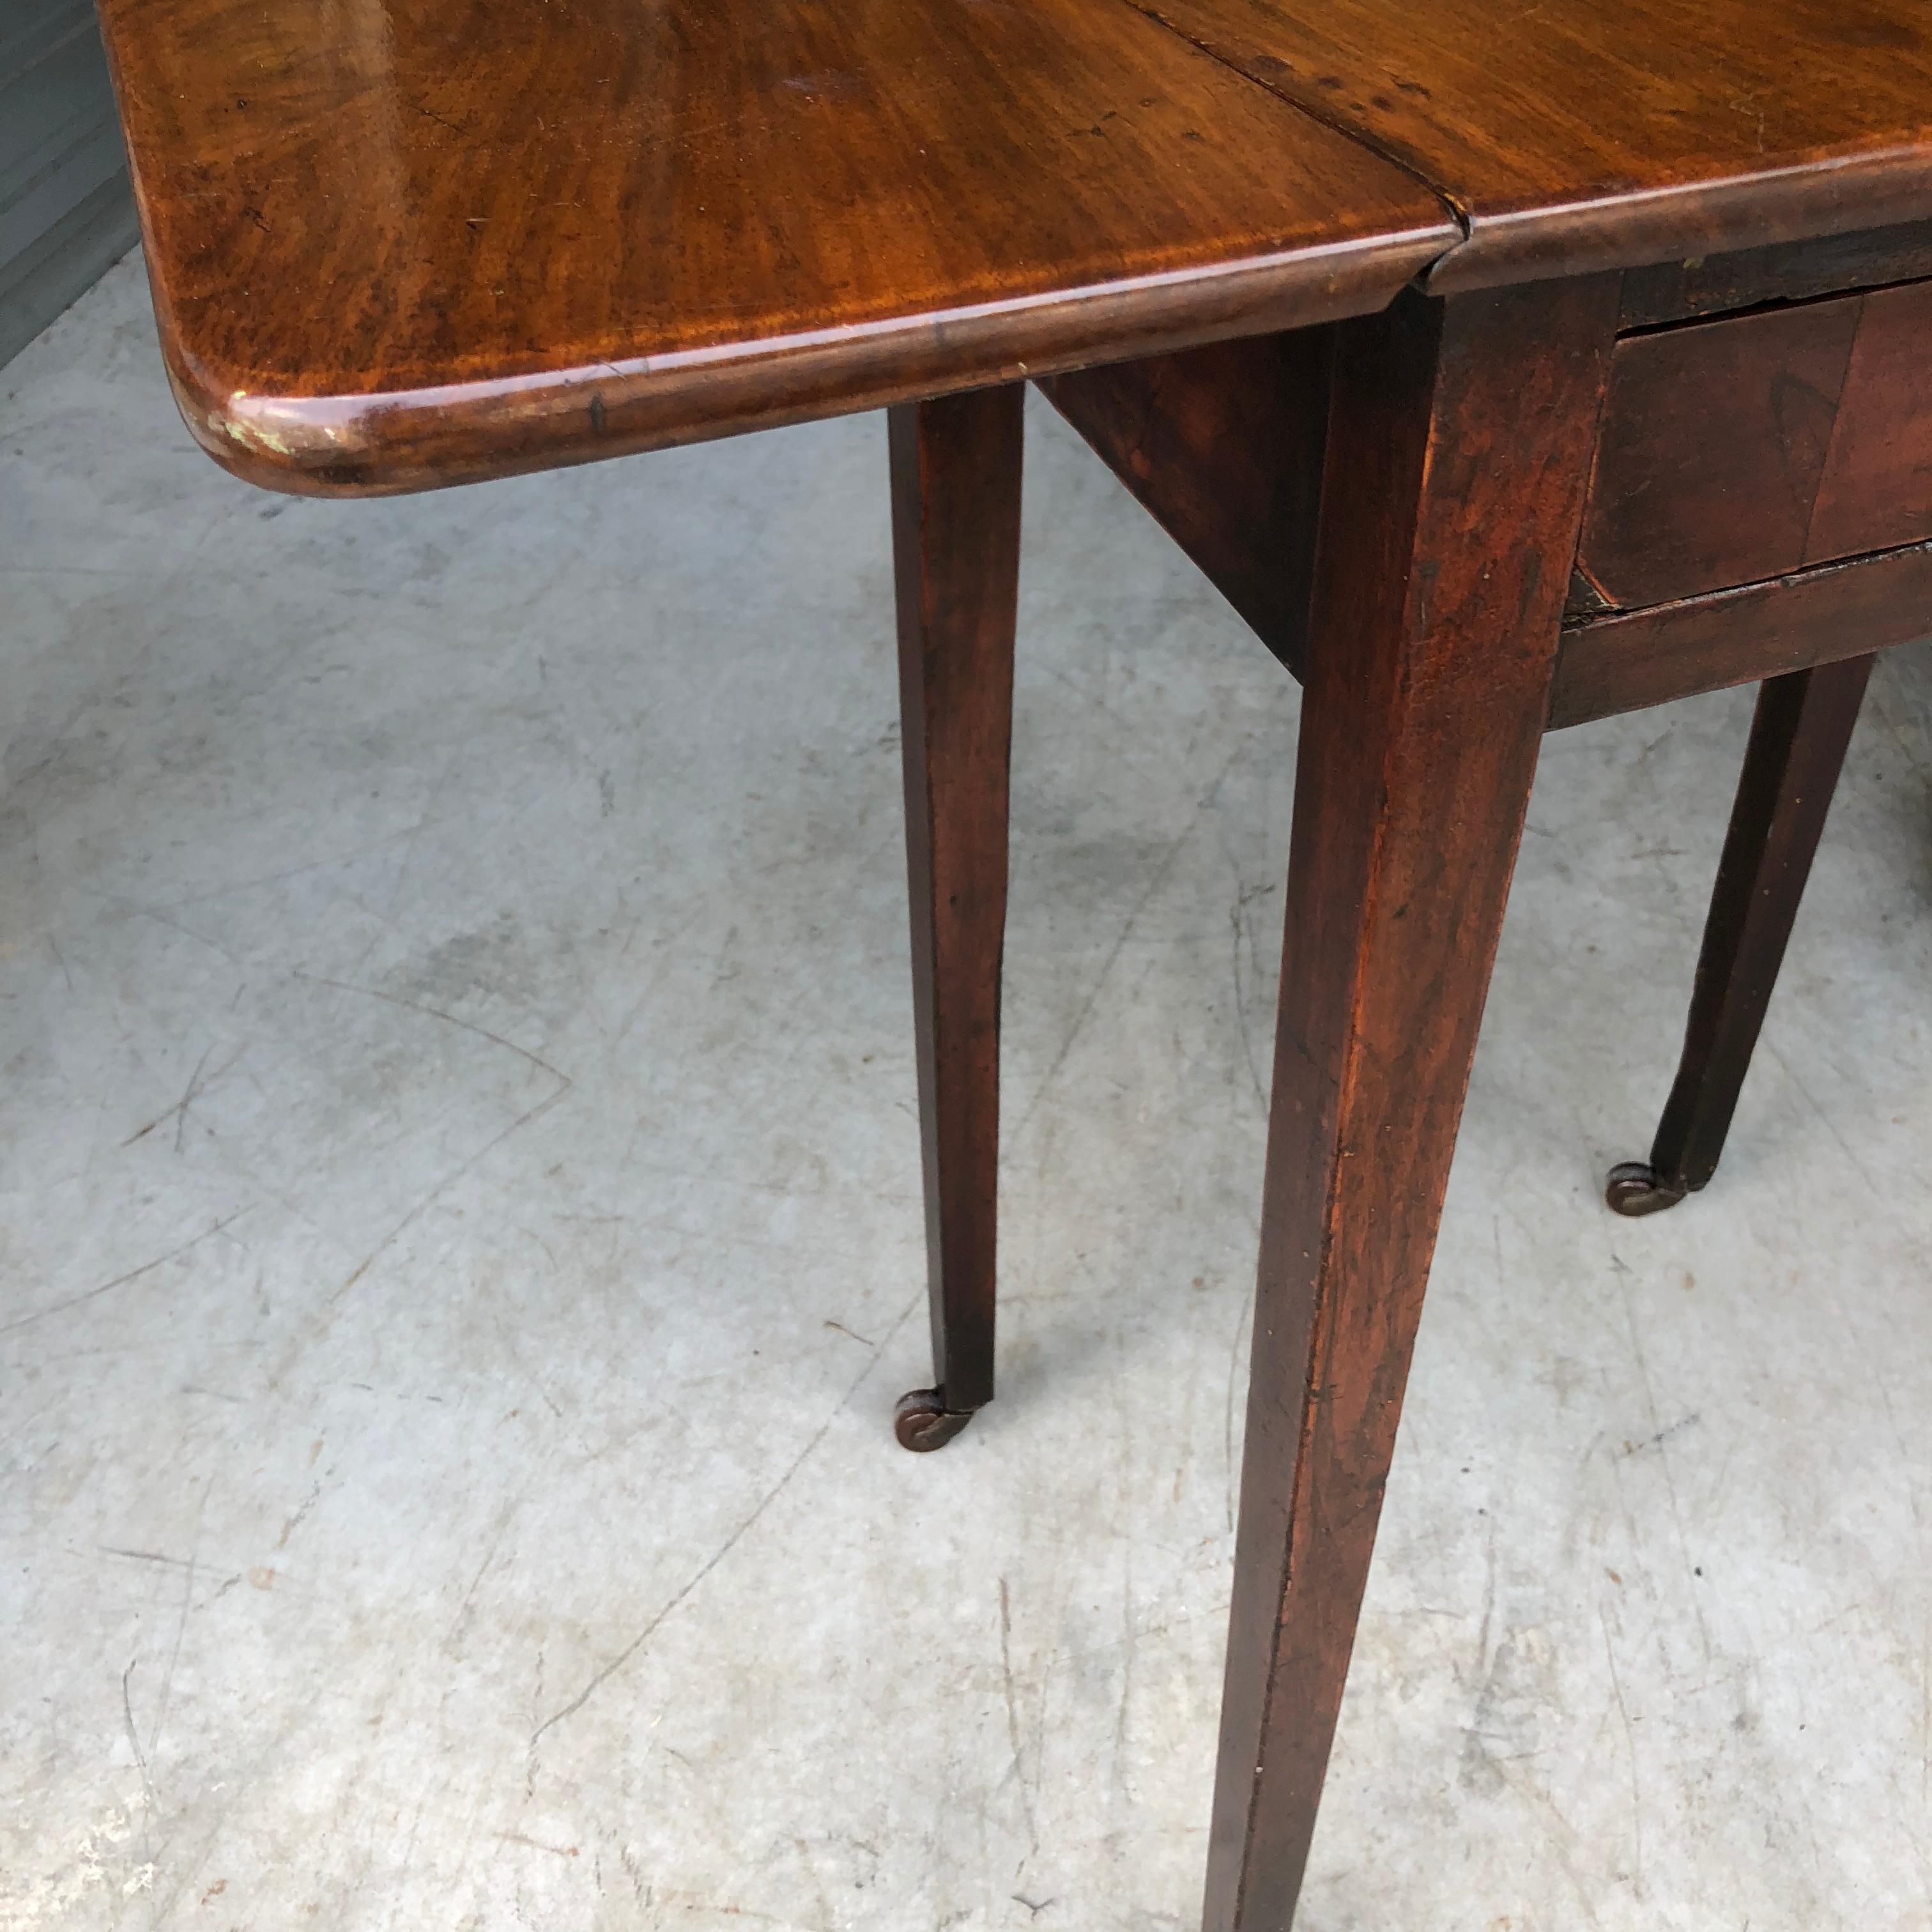 Classic Regency Style Drop-Leaf Table with Lion-Head Hardware 1